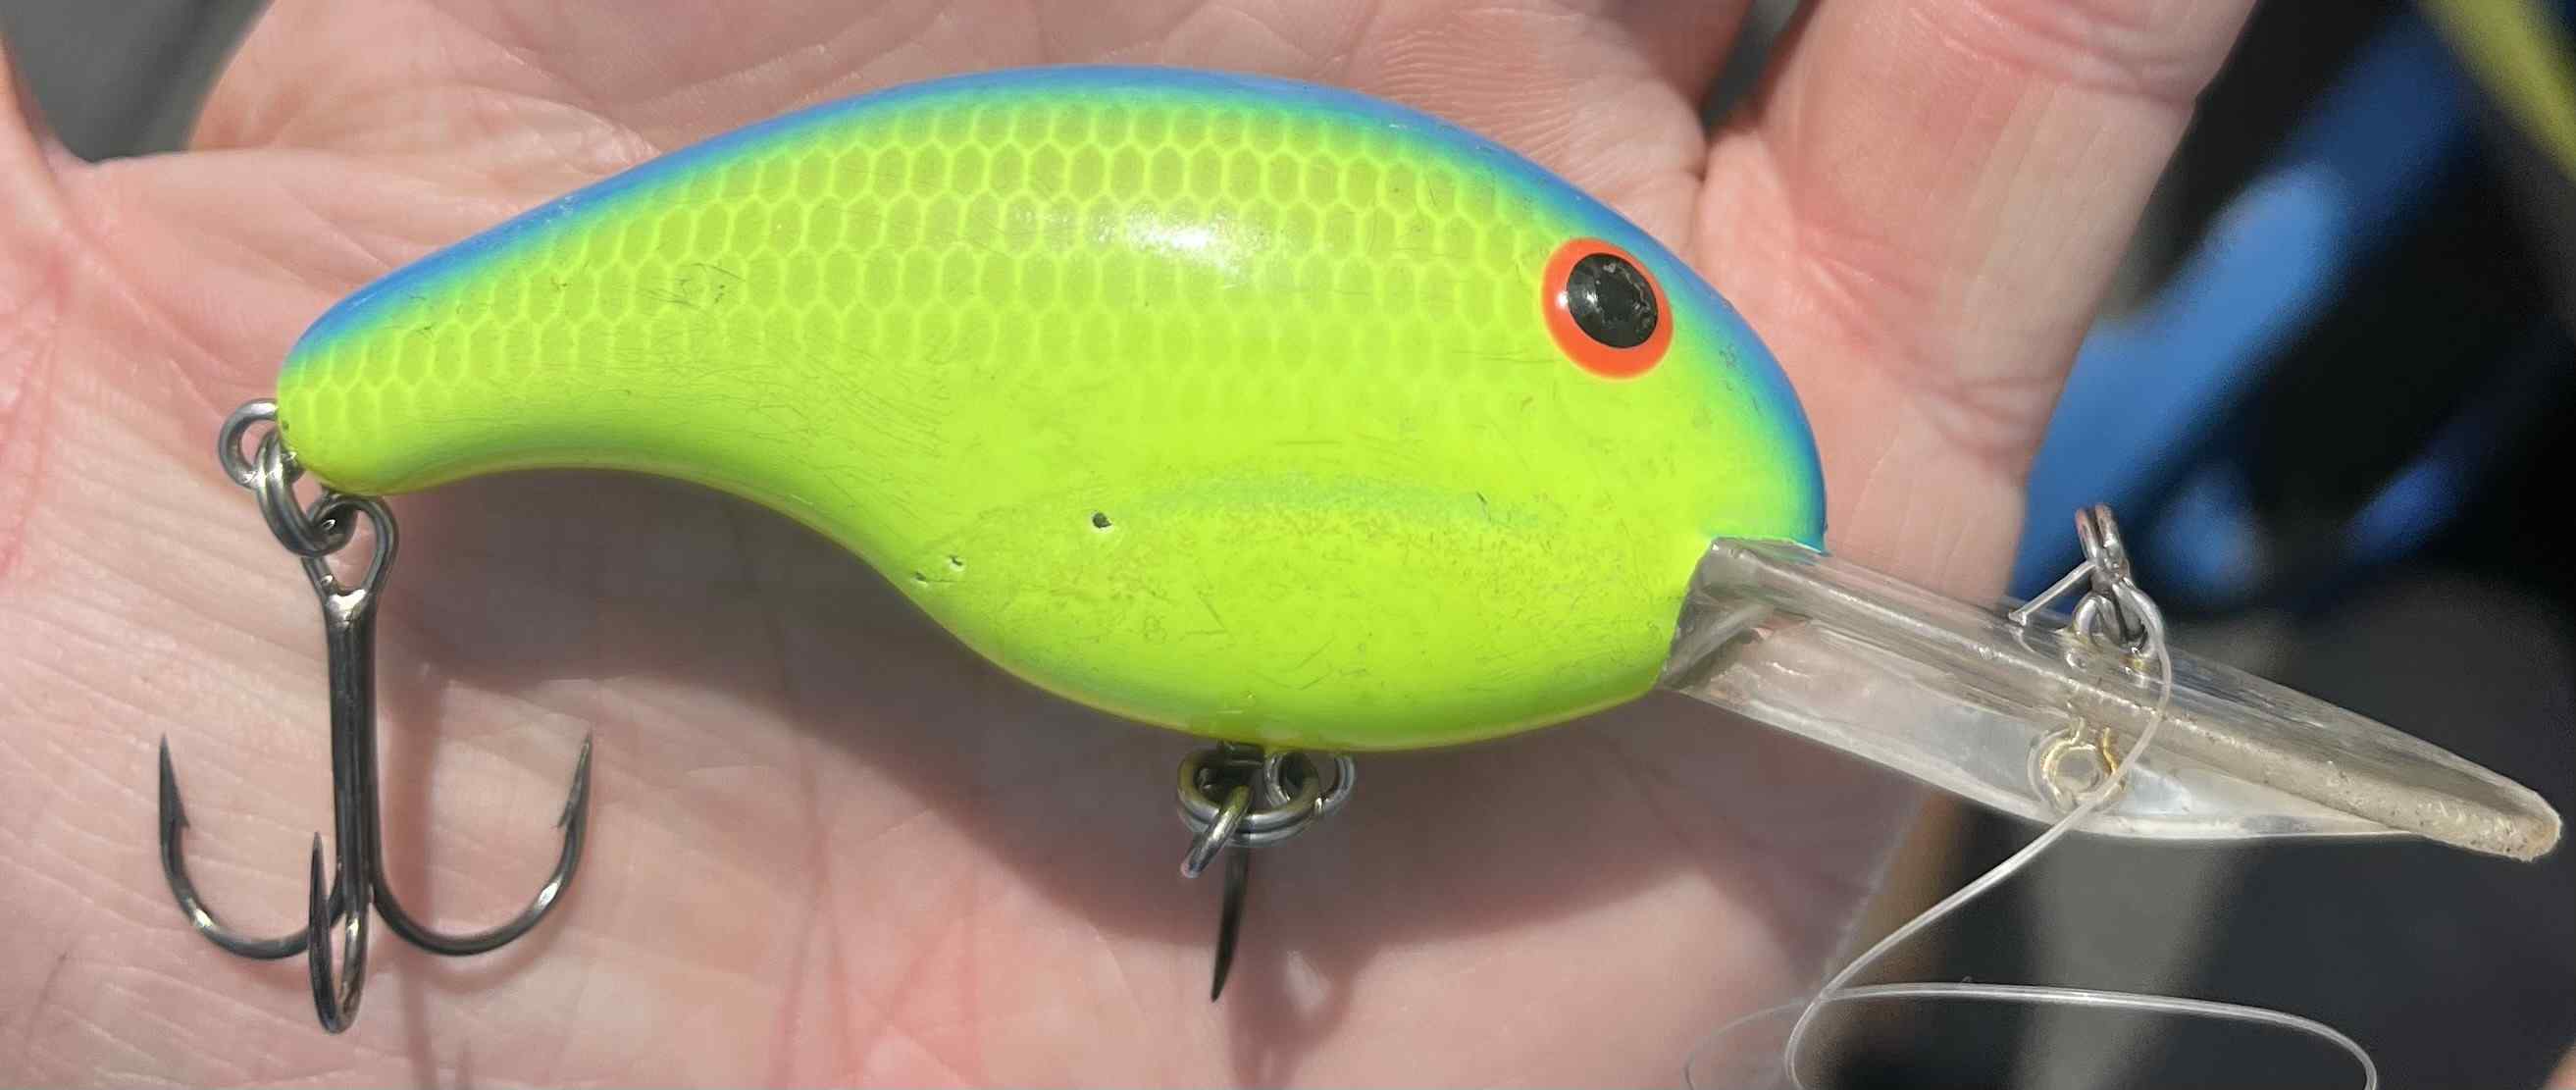 What crankbait is this? - Fishing Tackle - Bass Fishing Forums